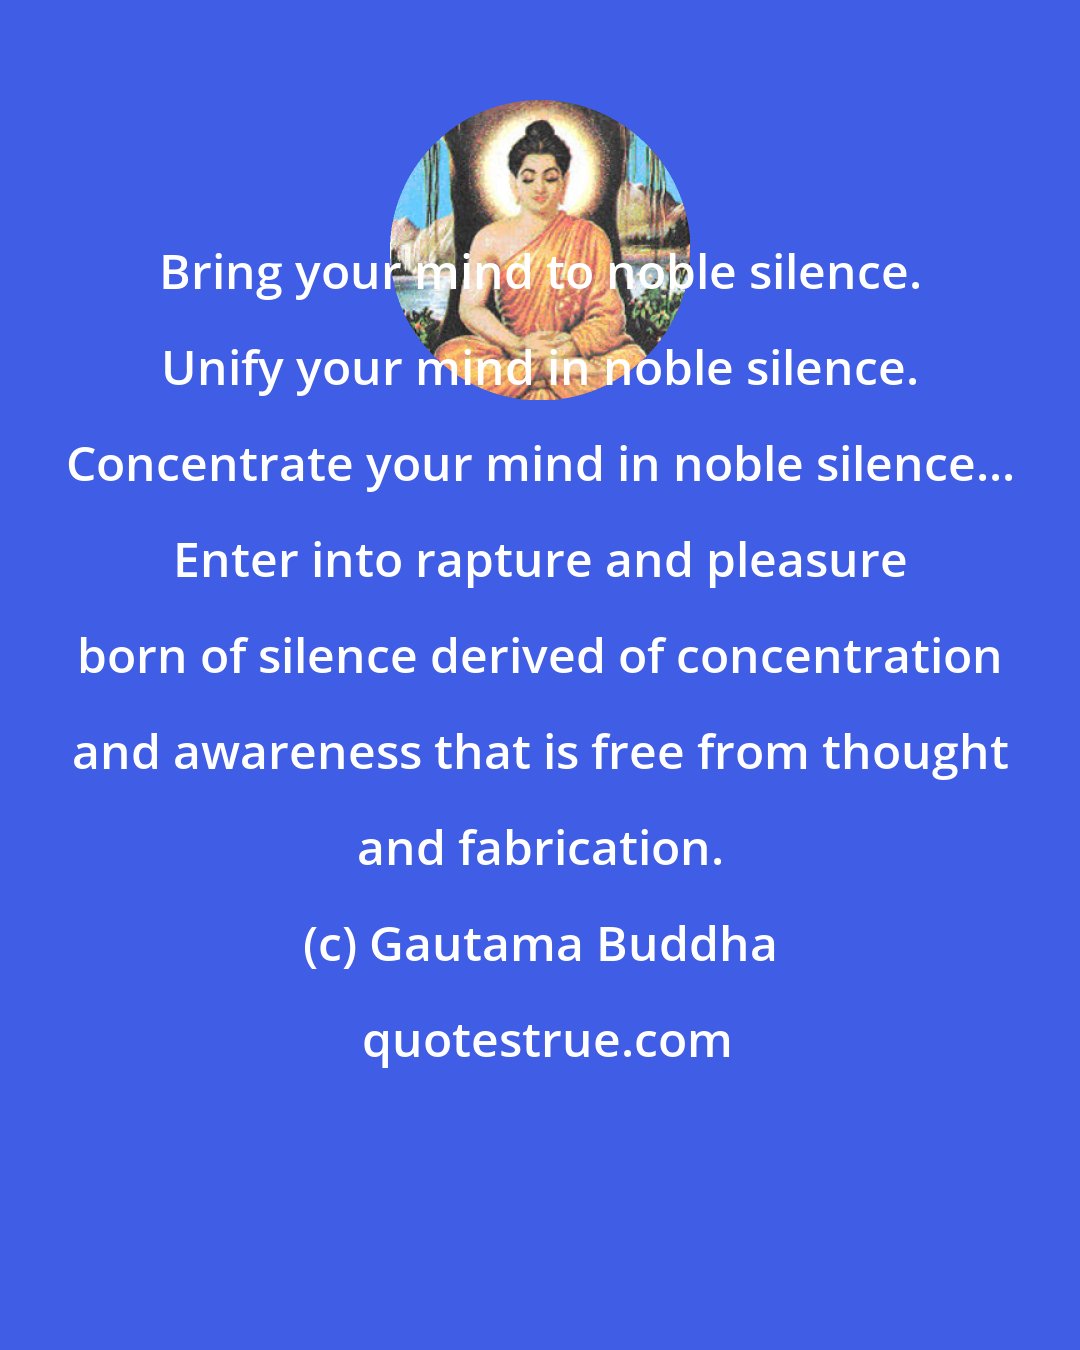 Gautama Buddha: Bring your mind to noble silence. Unify your mind in noble silence. Concentrate your mind in noble silence... Enter into rapture and pleasure born of silence derived of concentration and awareness that is free from thought and fabrication.